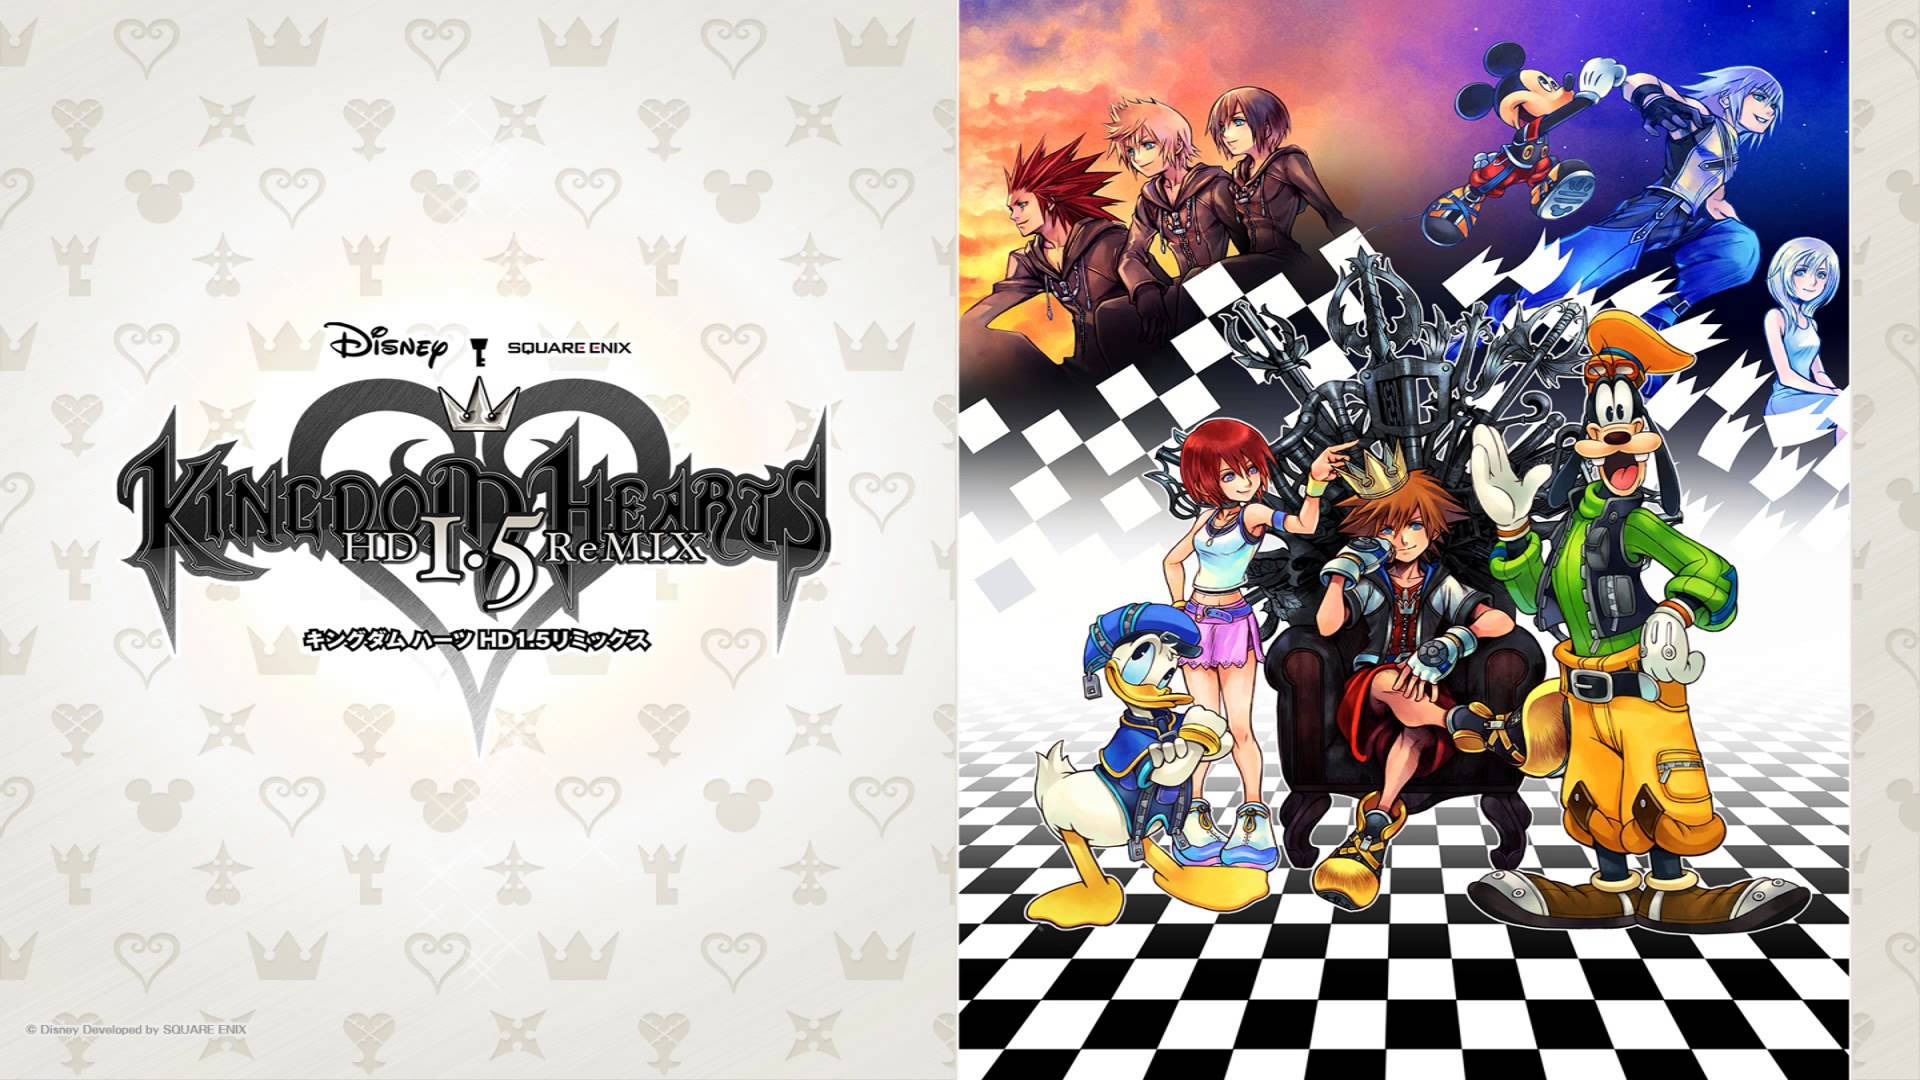 Kingdom Hearts 1920X1080 Wallpaper and Background Image